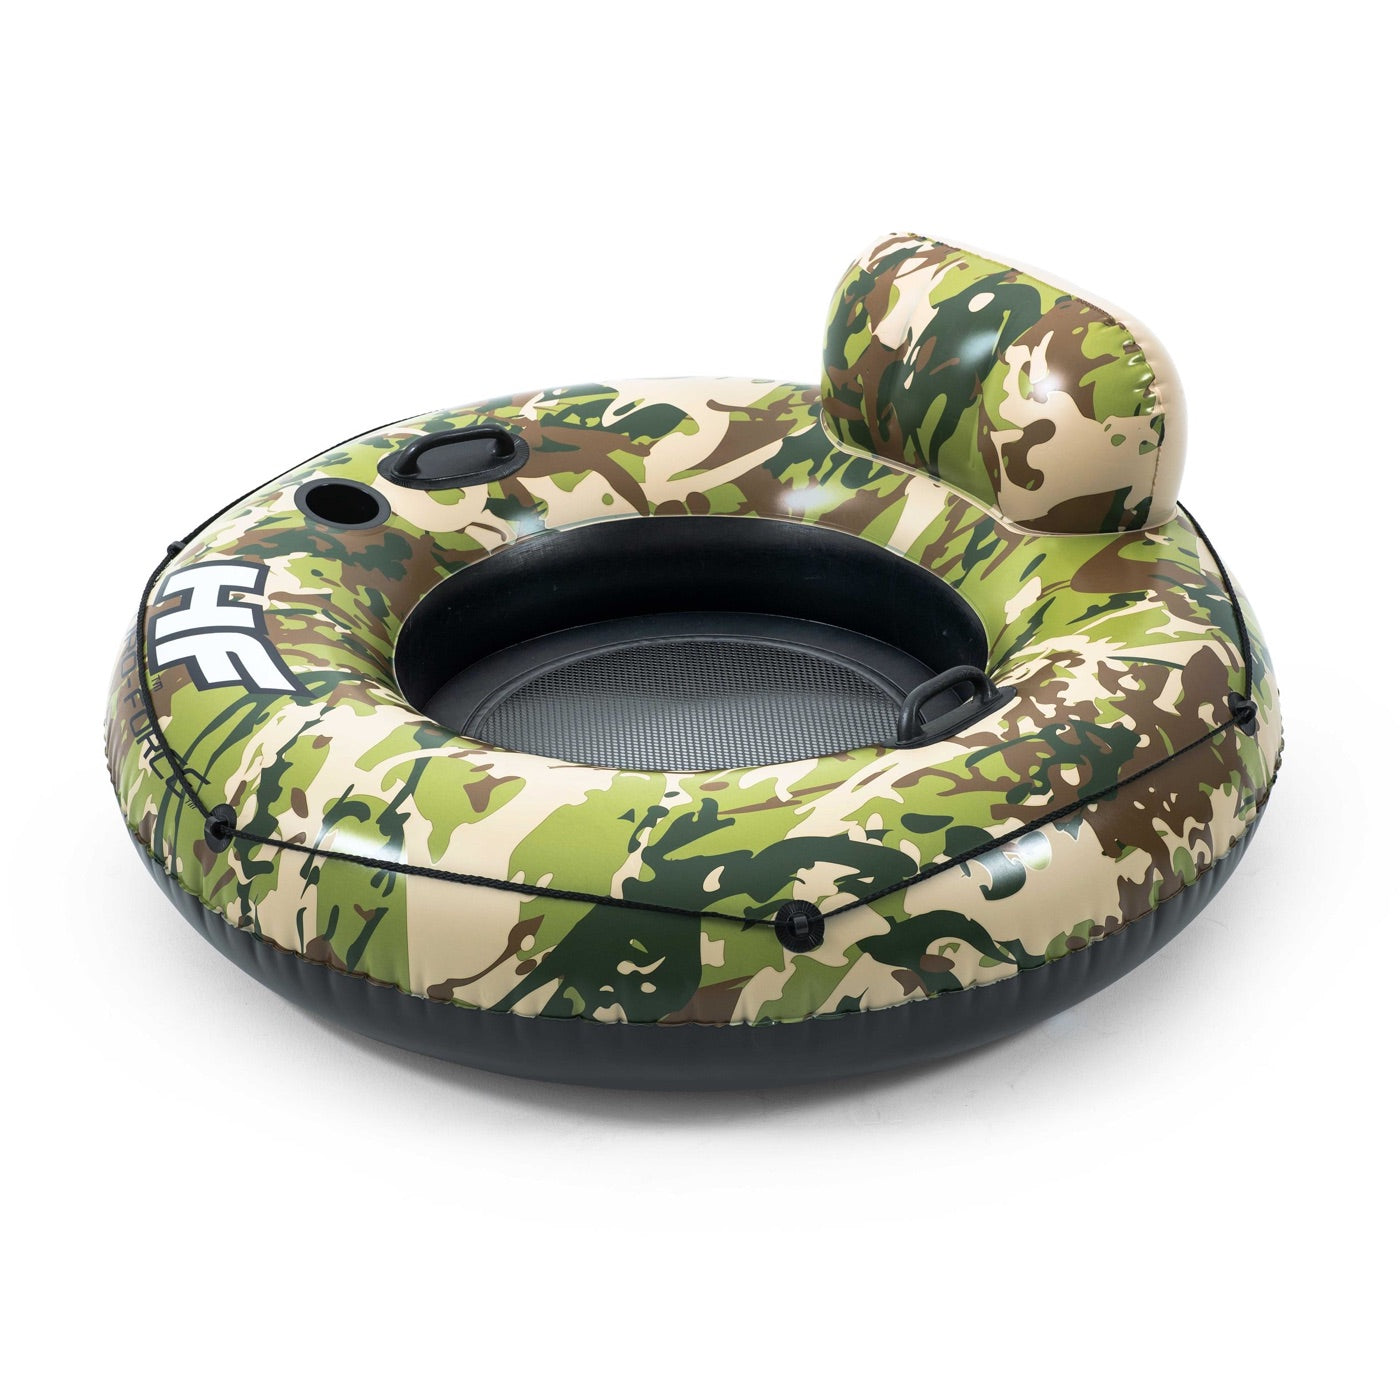 Flotador Anillo Inflable Camo Bestway Hydro Force